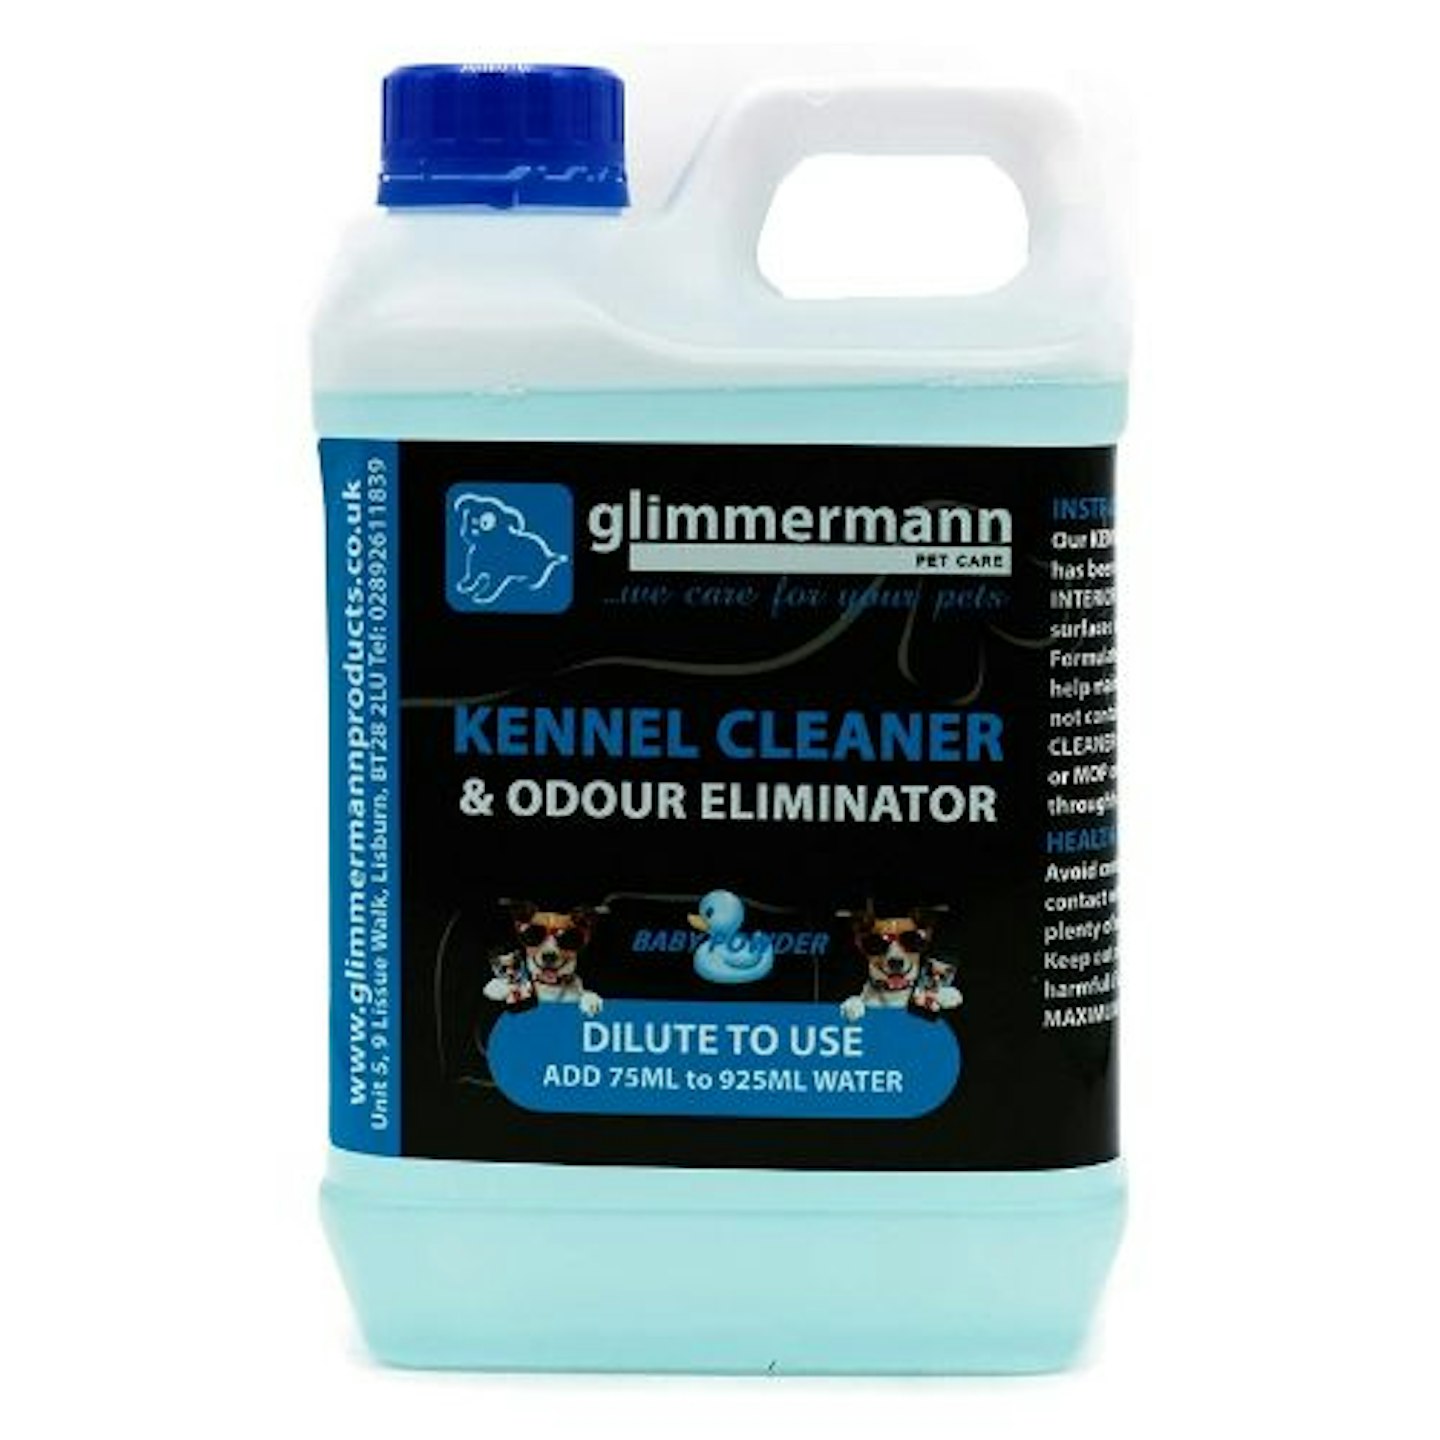 Glimmermann Products Kennel Cleaner and Odour Eliminator Pet Disinfectant Urine Deodoriser Baby Powder 1.8L